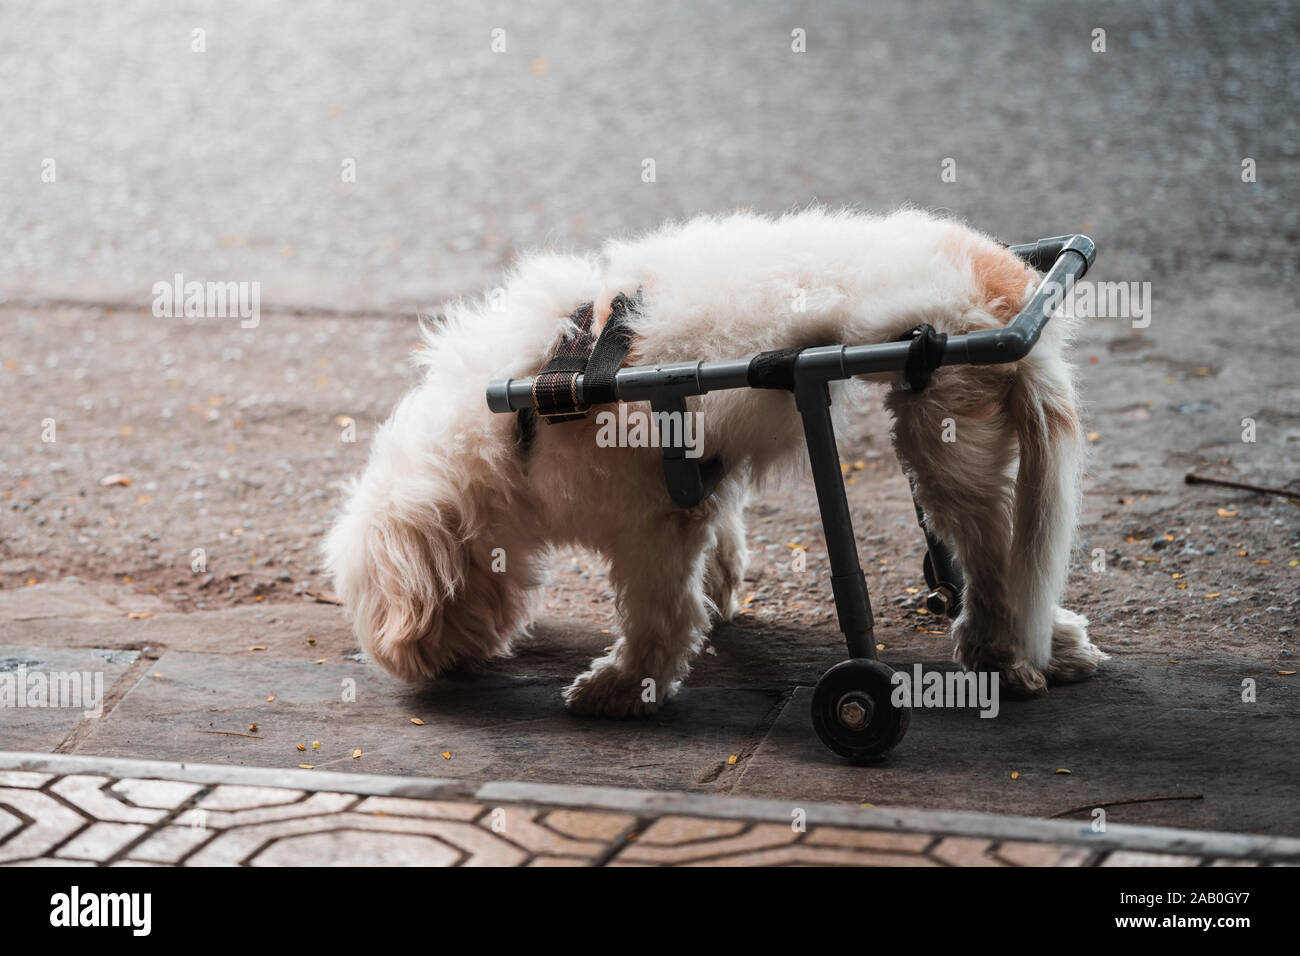 A small cute handicapped dog in a wheelchair paralyzed half way in the street looking down Stock Photo